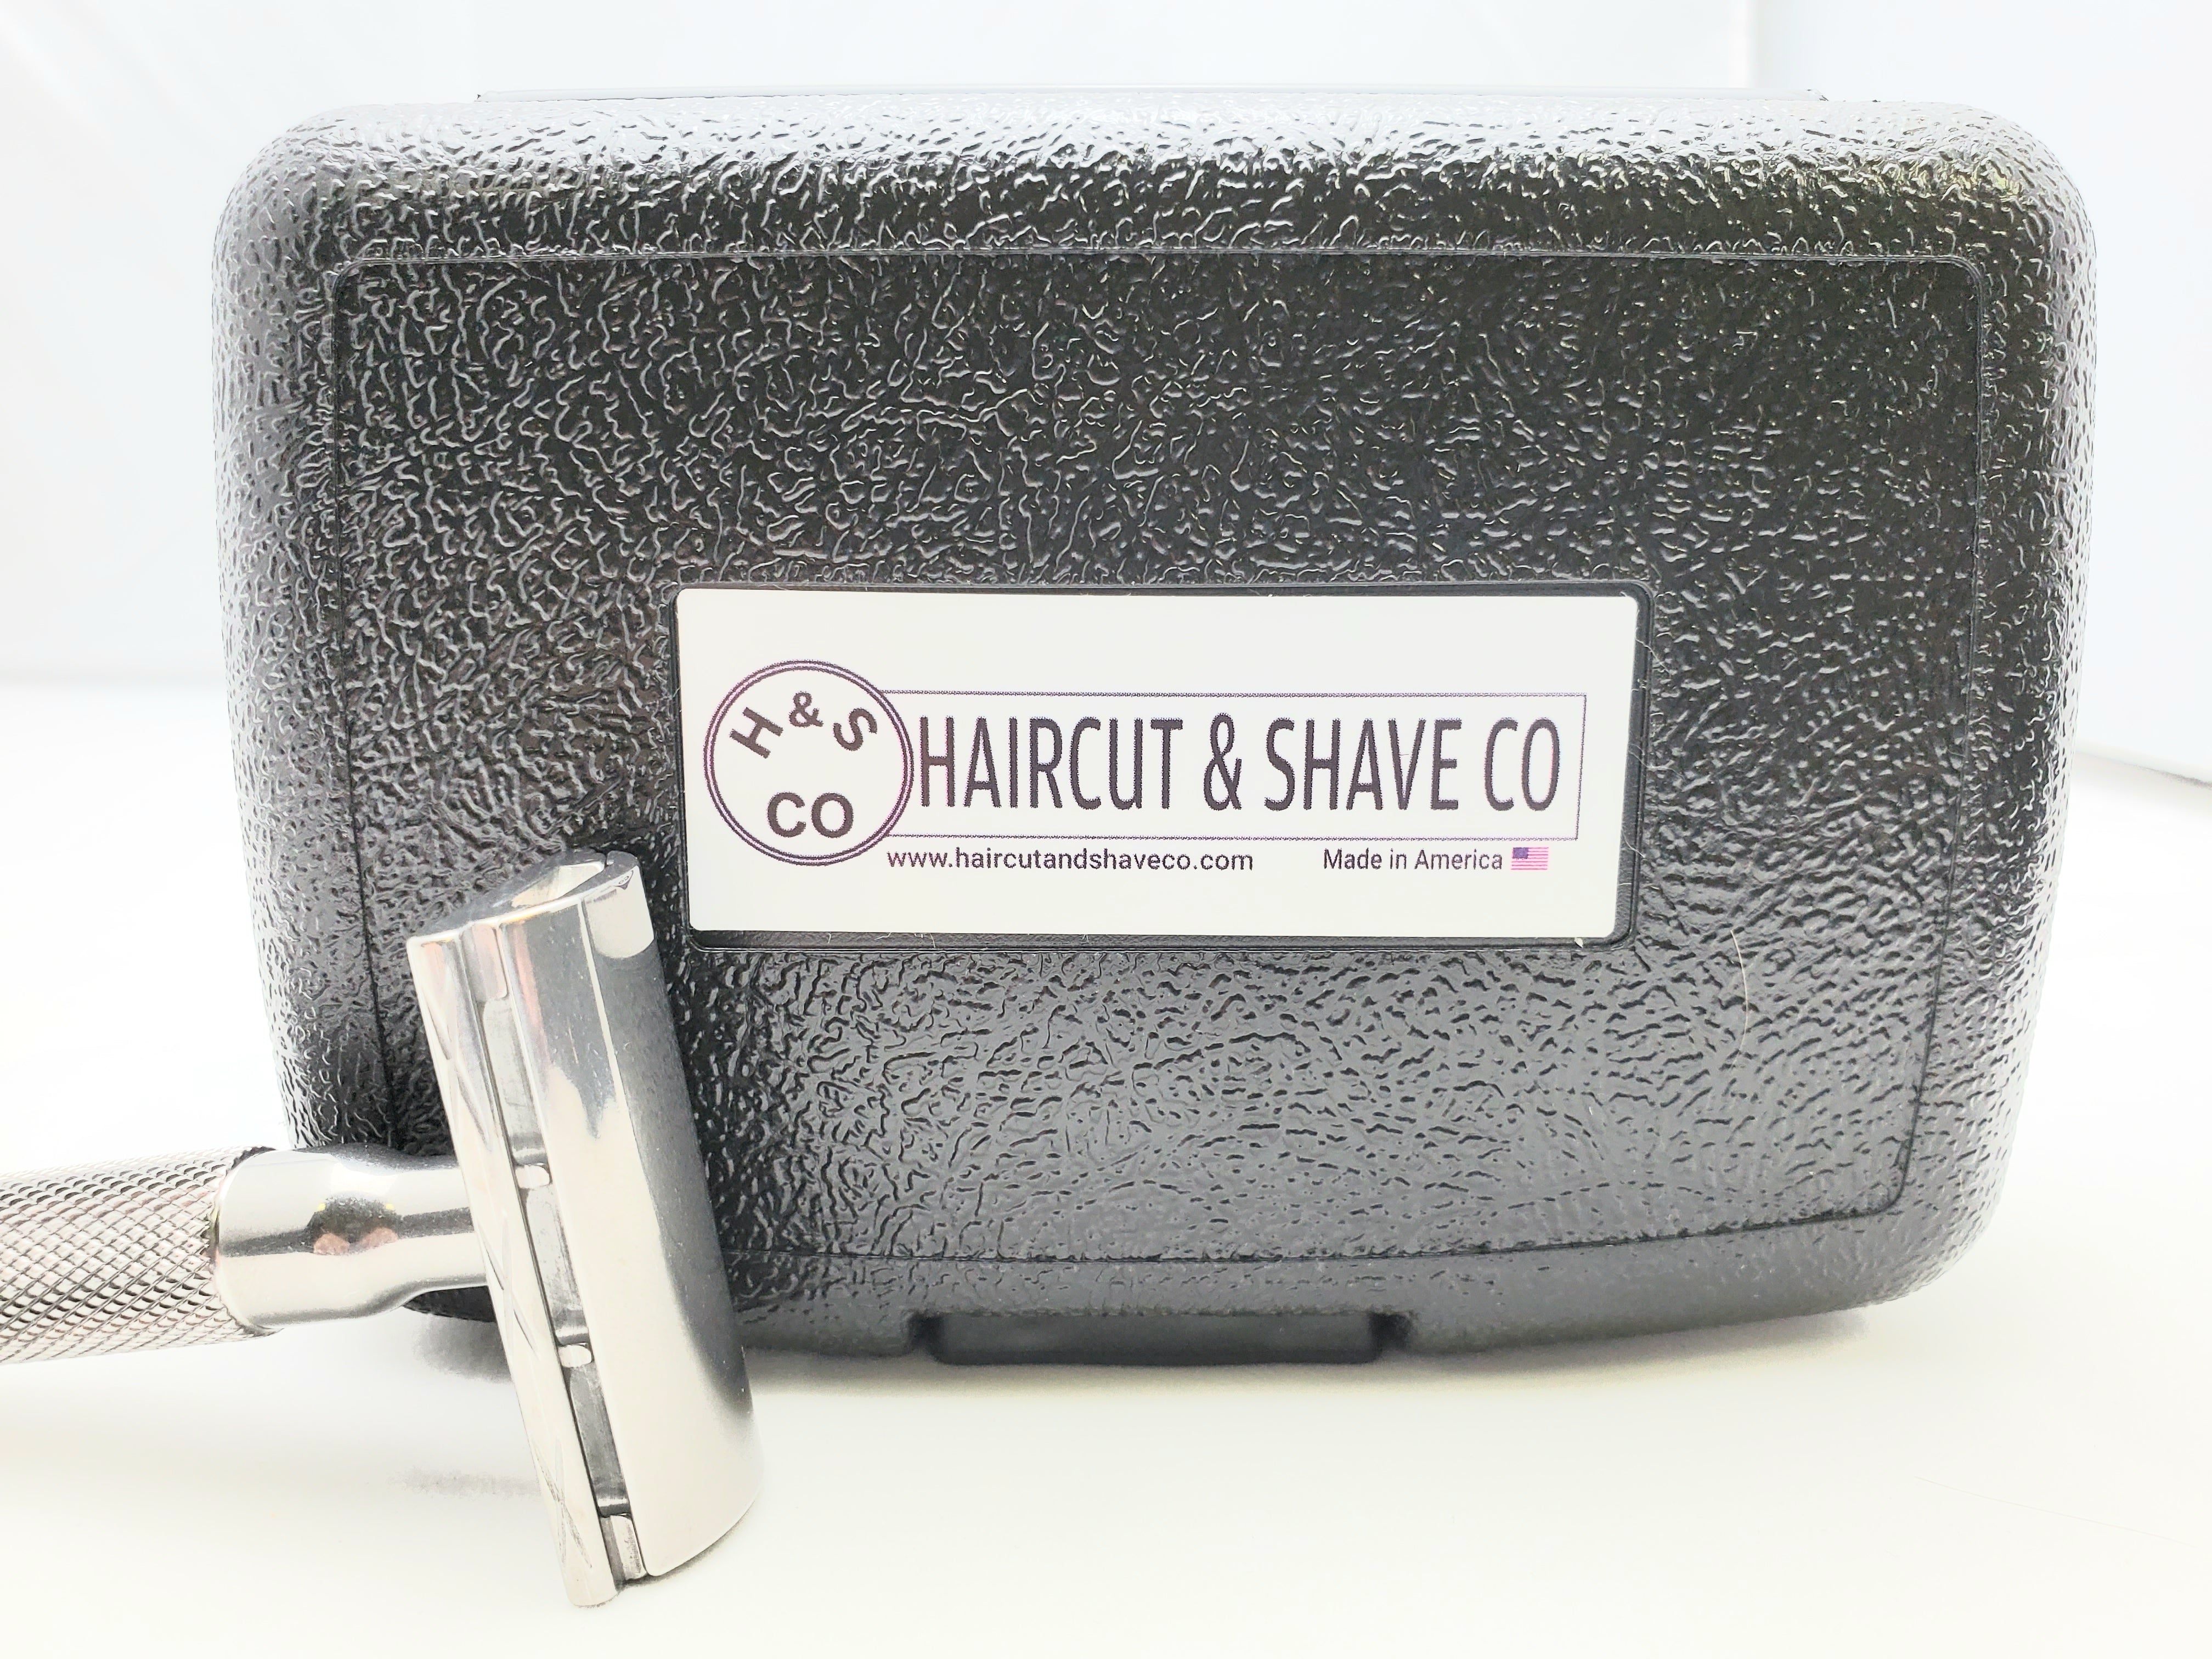 Haircut & Shave Co.